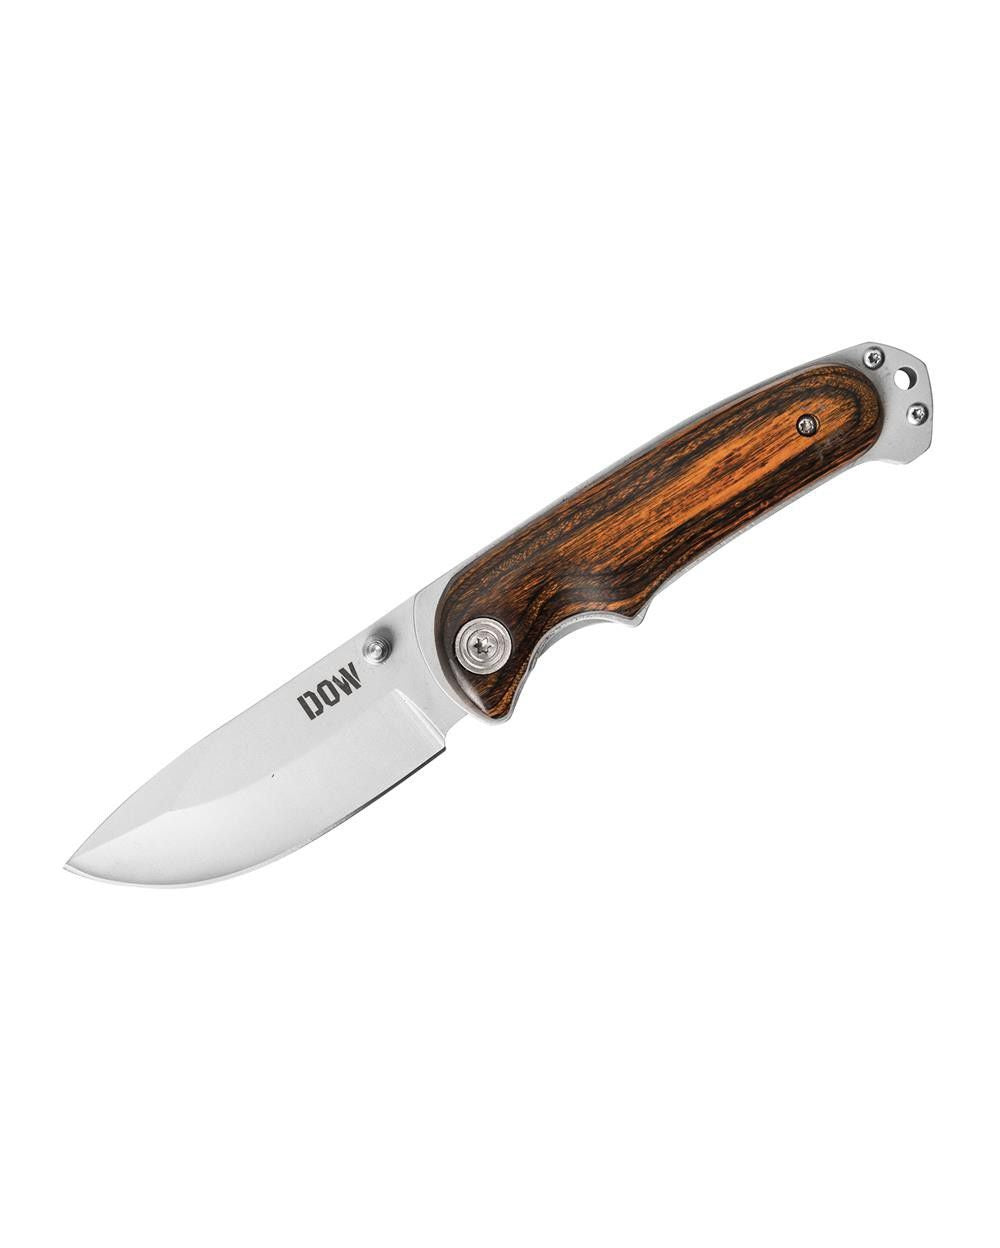 Whitetail Folding Knife - Brown - 3.5inch (9cm) Blade